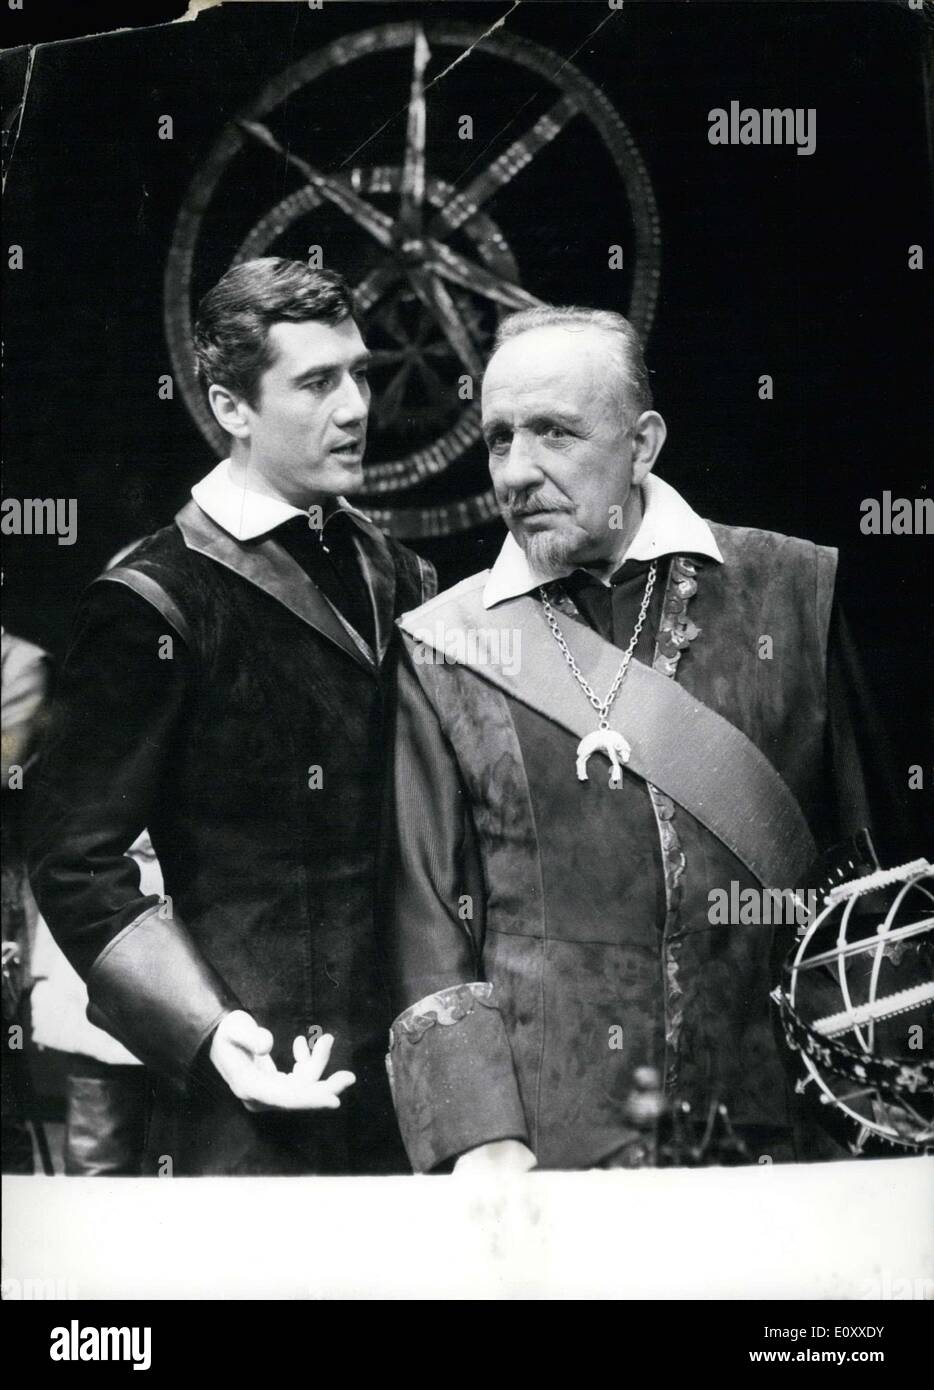 Mar. 11, 1968 - O.E. Hasse is currently on stage playing ''Wallenstein.'' He plays the titular role in Karl Heinz Stroux's production of this piece in D?sseldorf's playhouse. Erwin Zimmer designed the costumes and Theo Otto managed set design. Our picture shows a scene from the second act ''Die Piccolomini,'' with O.E. Hasse(right) and Wolfgang Arps as Max Piccolomini. Stock Photo